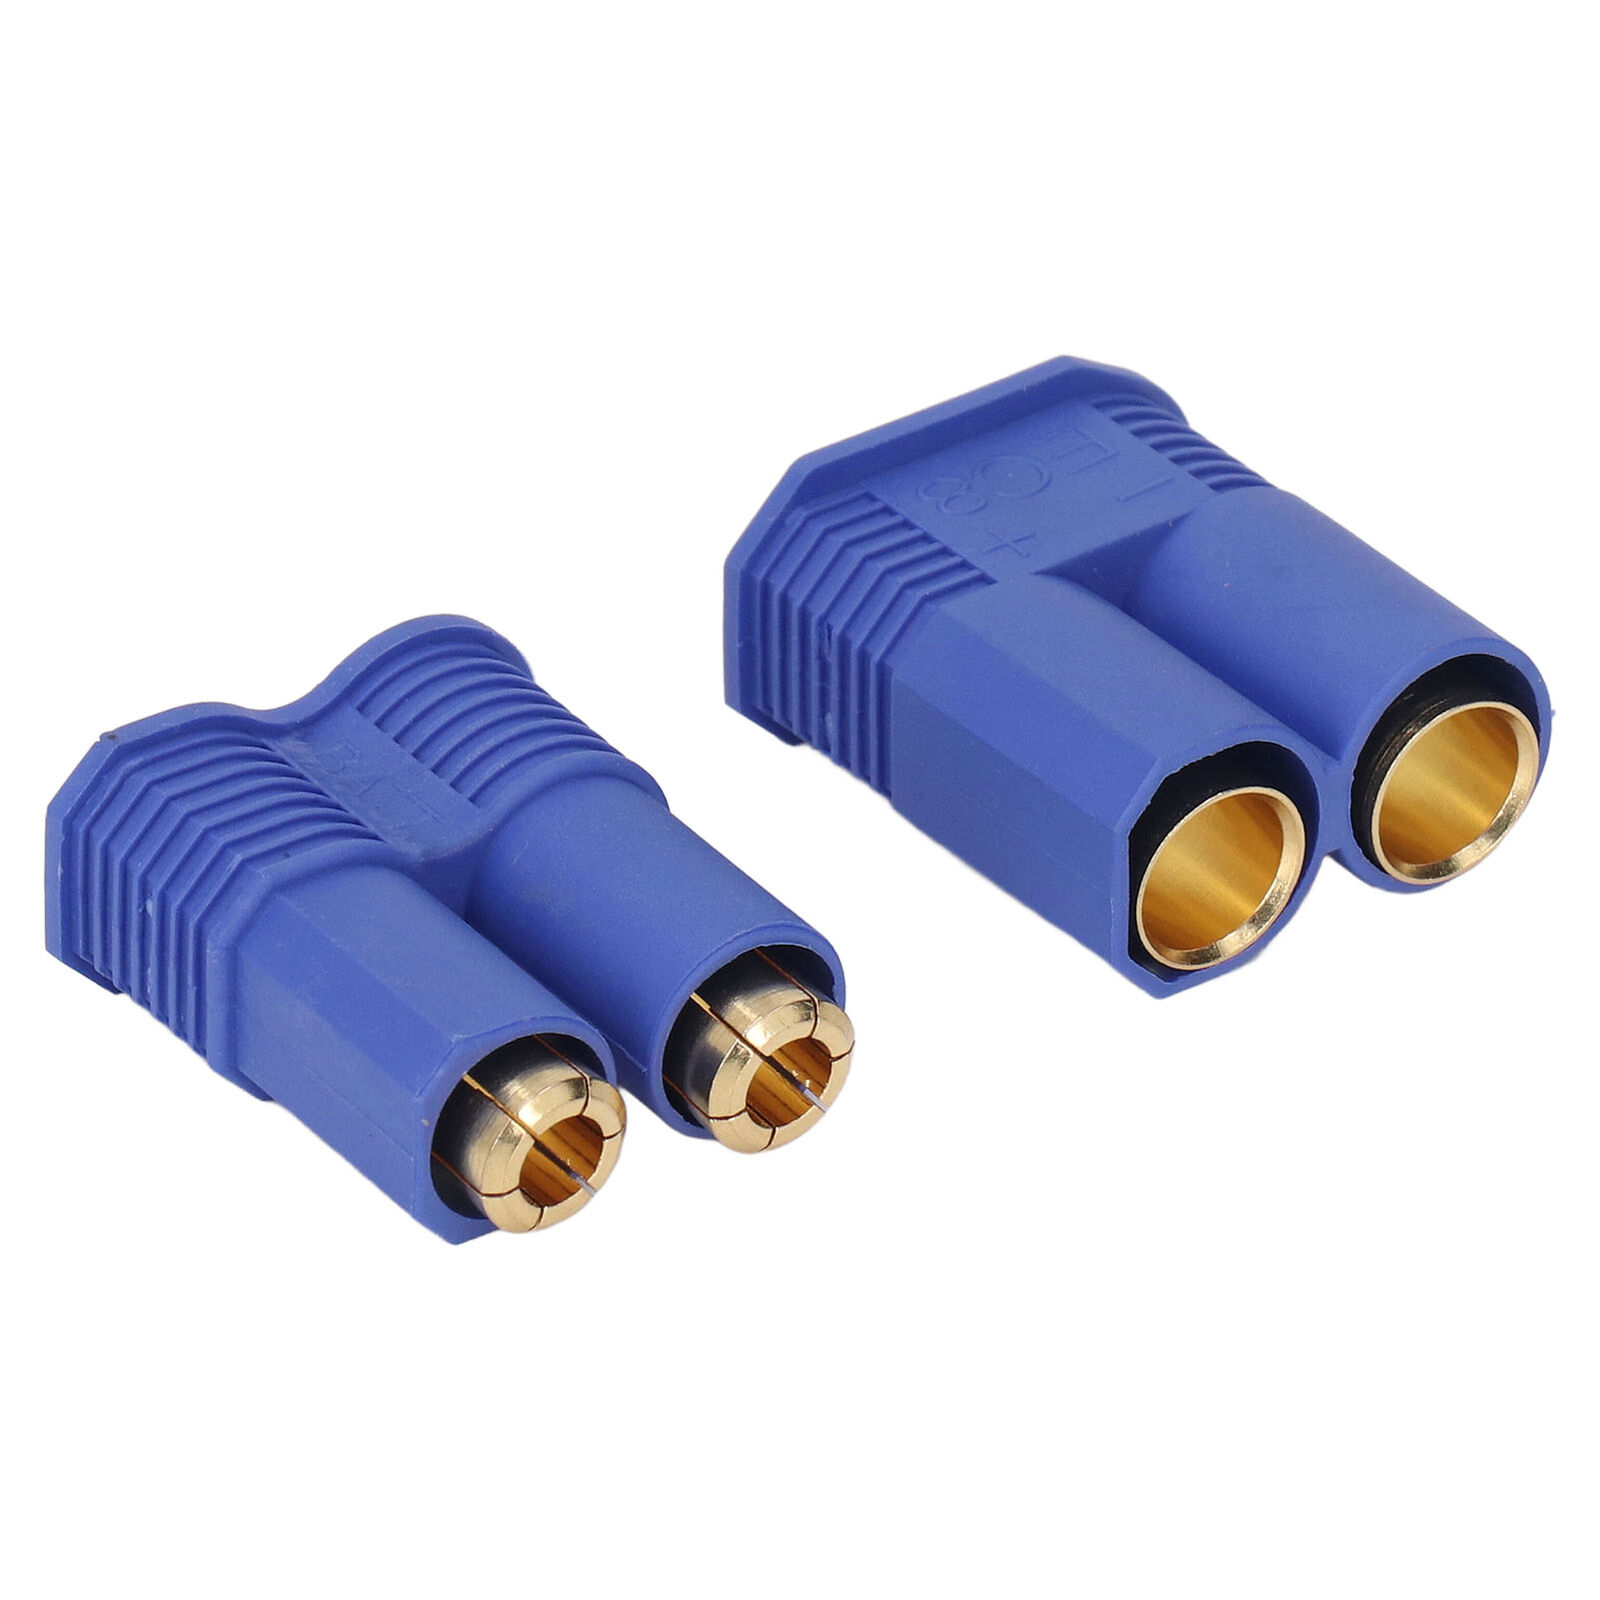 10 Set EC8 Plug 8mm Brass Gold Plated Male Female Connector Plug With Housing